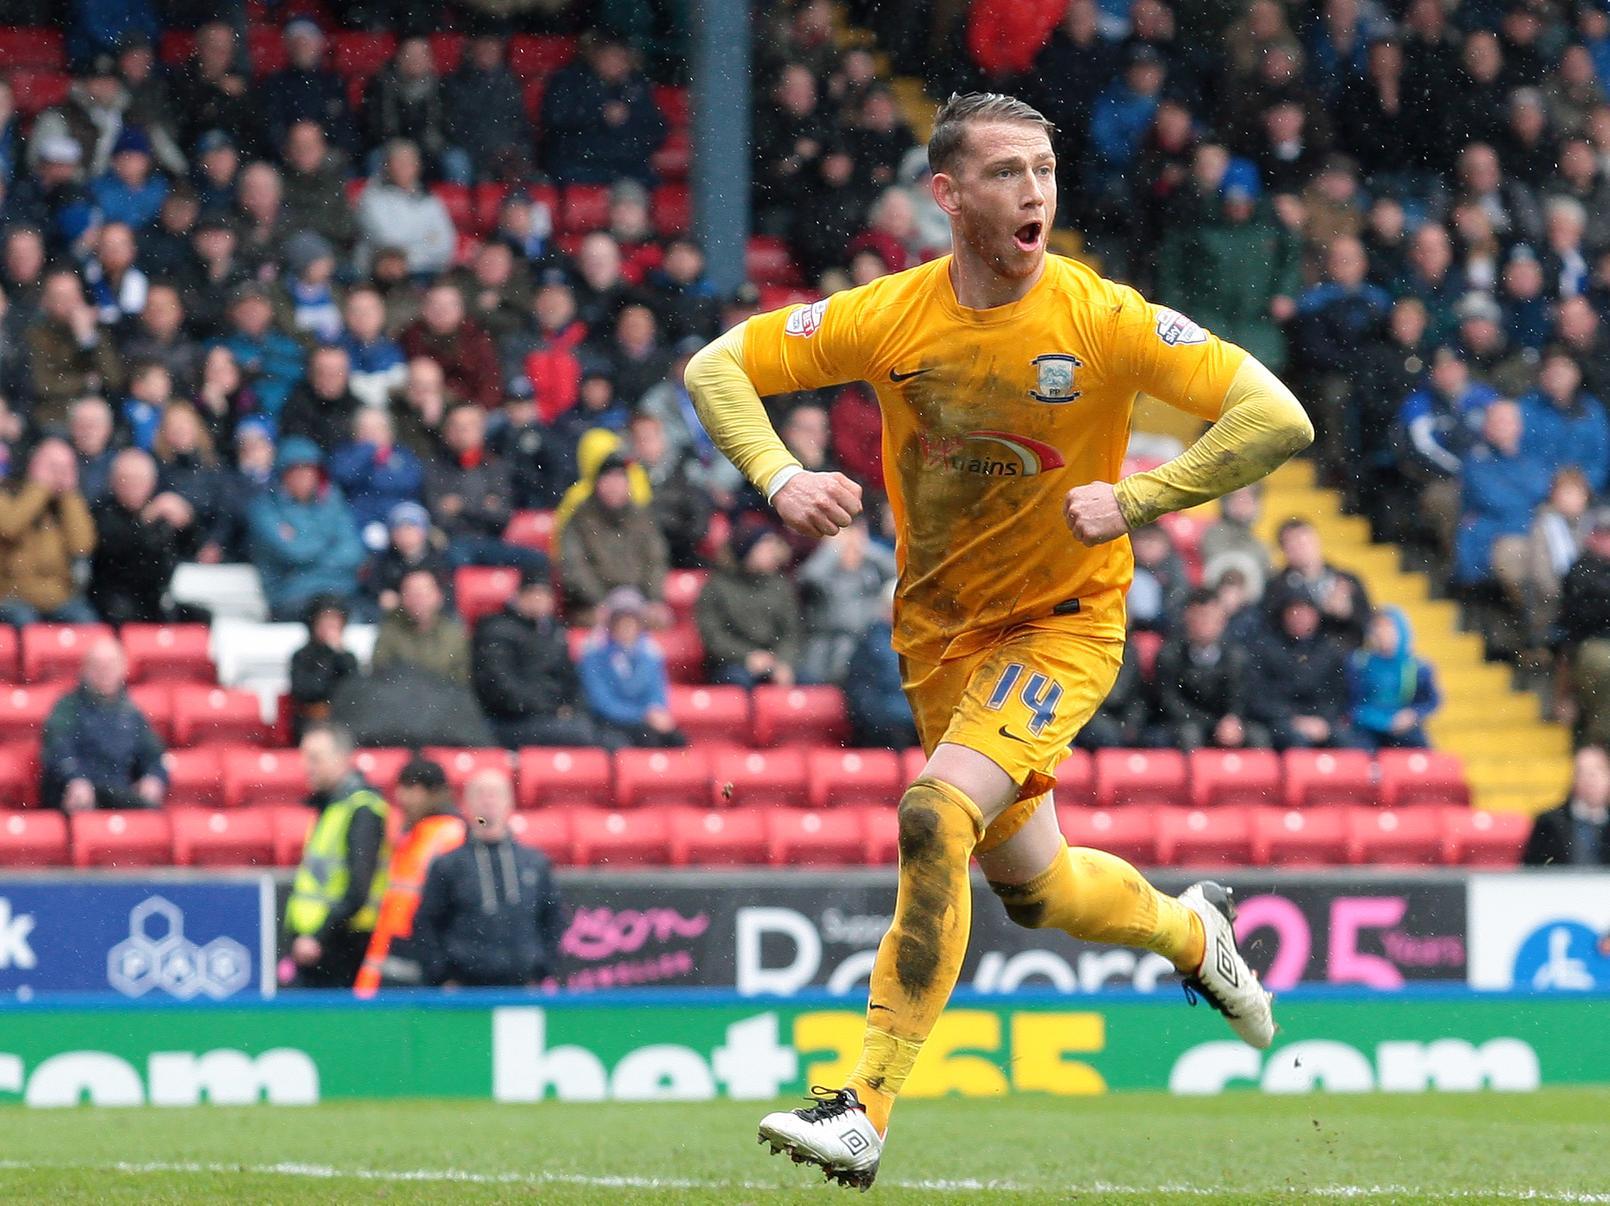 Clinical as he won player of the year in League One in North End's promotion season, Garner would take the game by the scruff of the neck. A PNE fan that won at Wembley playing for his team.